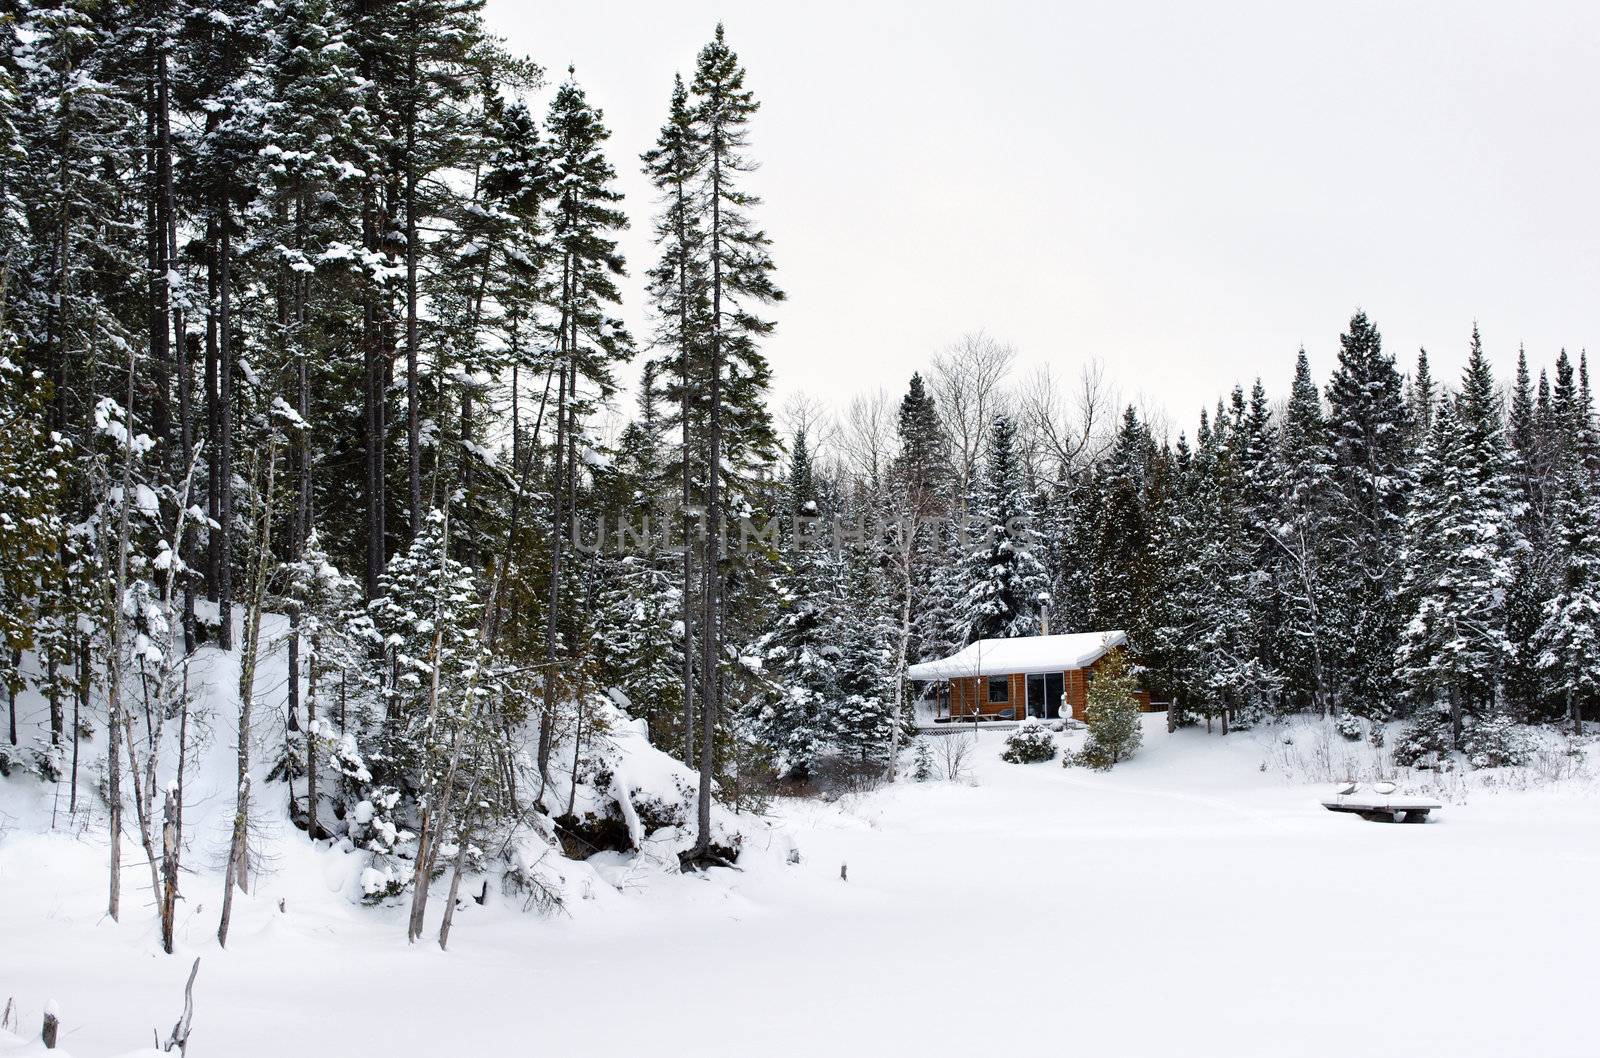 Great winter season landscape with a wood cabin and trees covered by snow on a cold winter day, cottage by a lake.